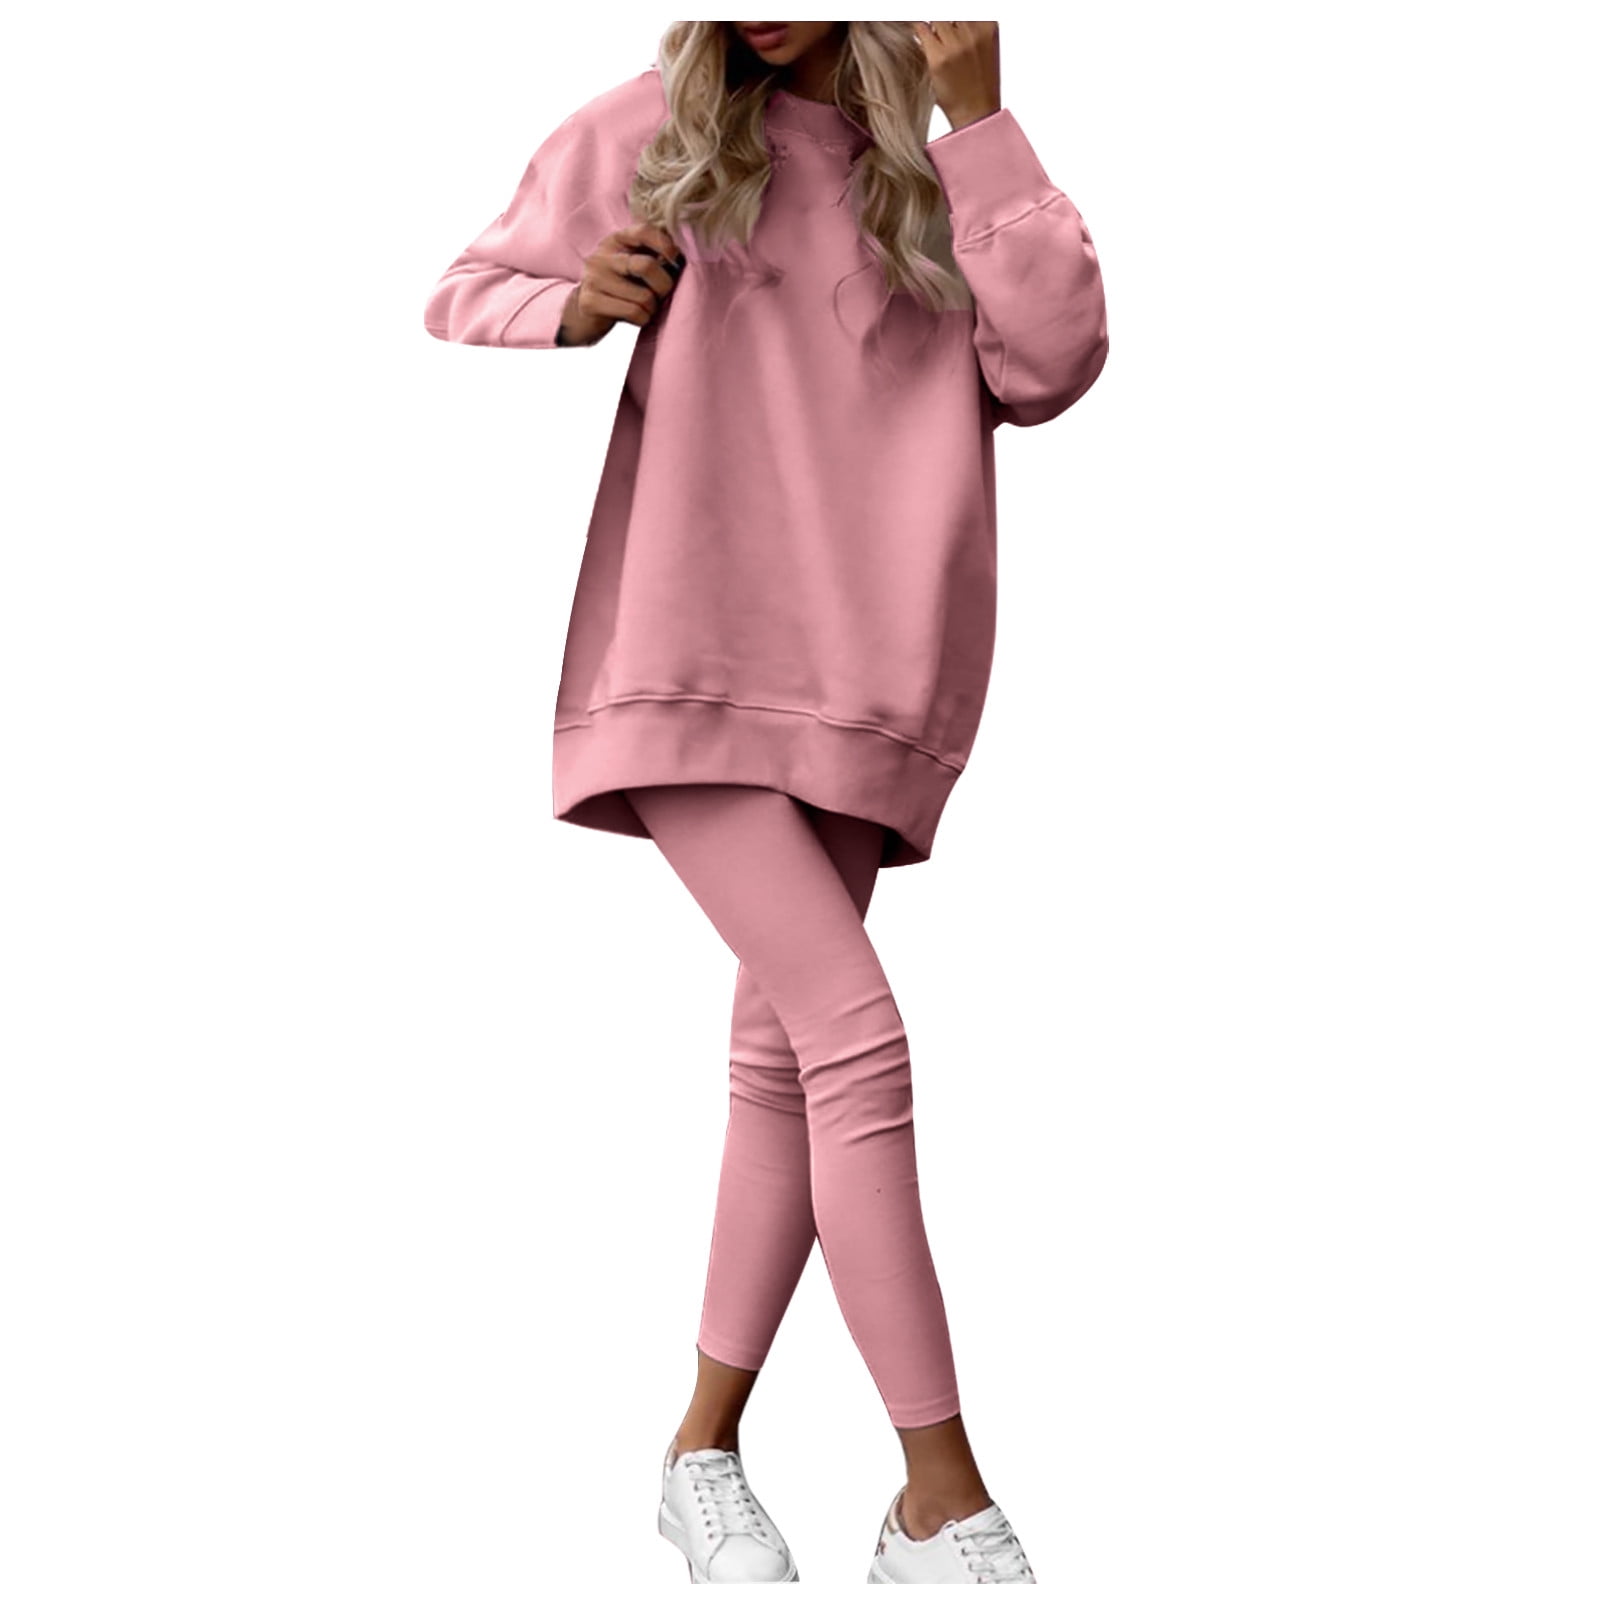 JBEELATE 3 Piece Outfits Lounge Jogging Suits for Women Hoodie